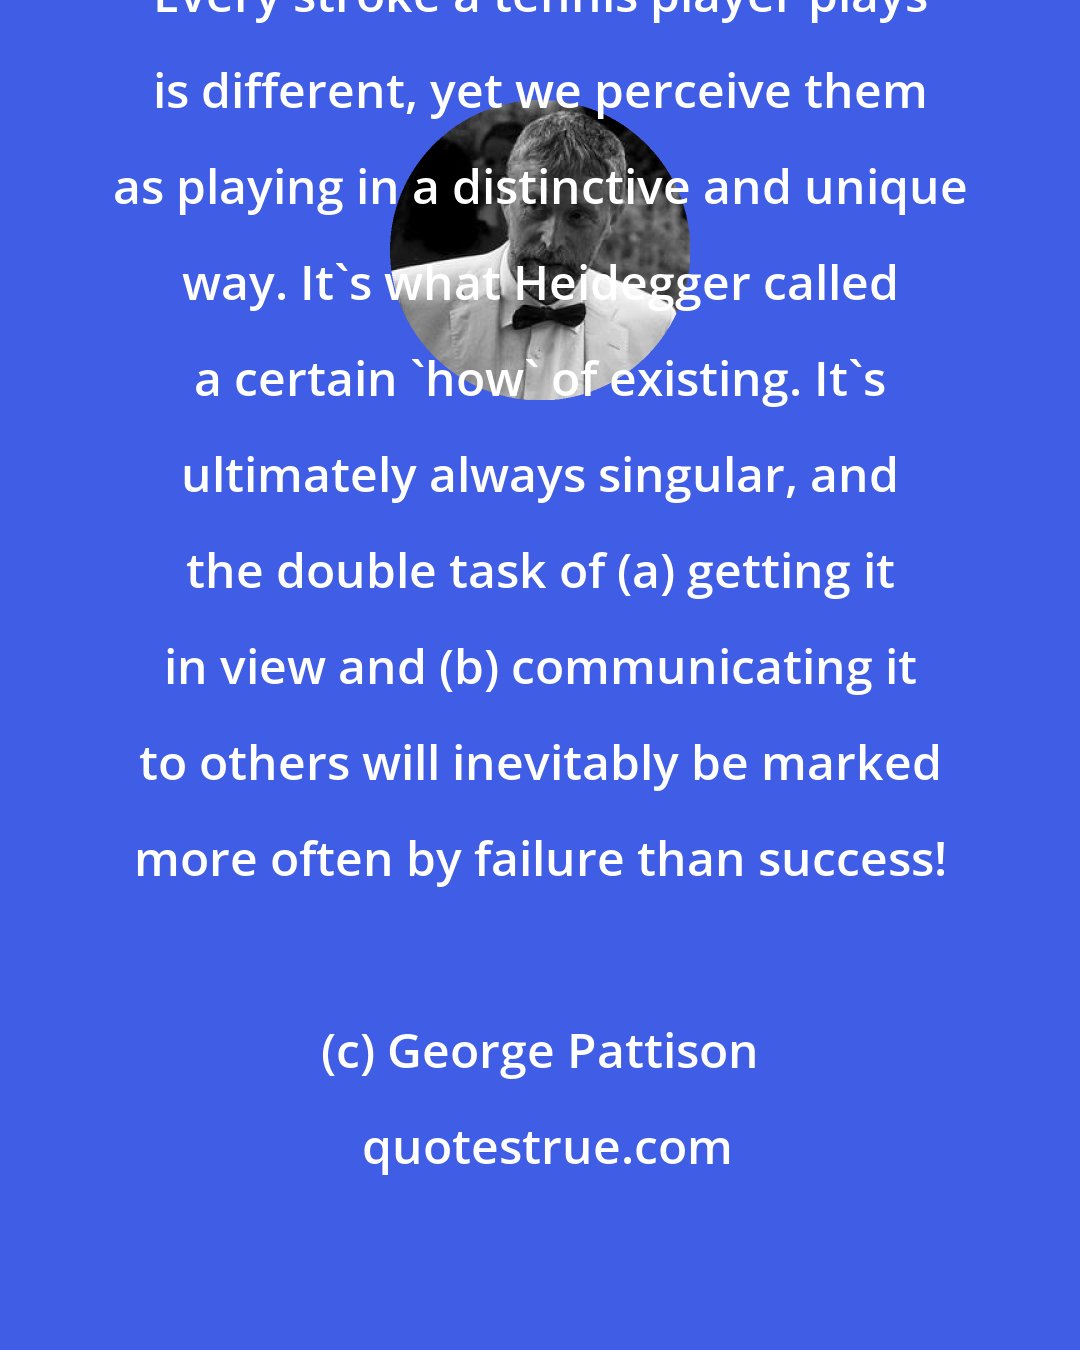 George Pattison: Every stroke a tennis player plays is different, yet we perceive them as playing in a distinctive and unique way. It's what Heidegger called a certain 'how' of existing. It's ultimately always singular, and the double task of (a) getting it in view and (b) communicating it to others will inevitably be marked more often by failure than success!